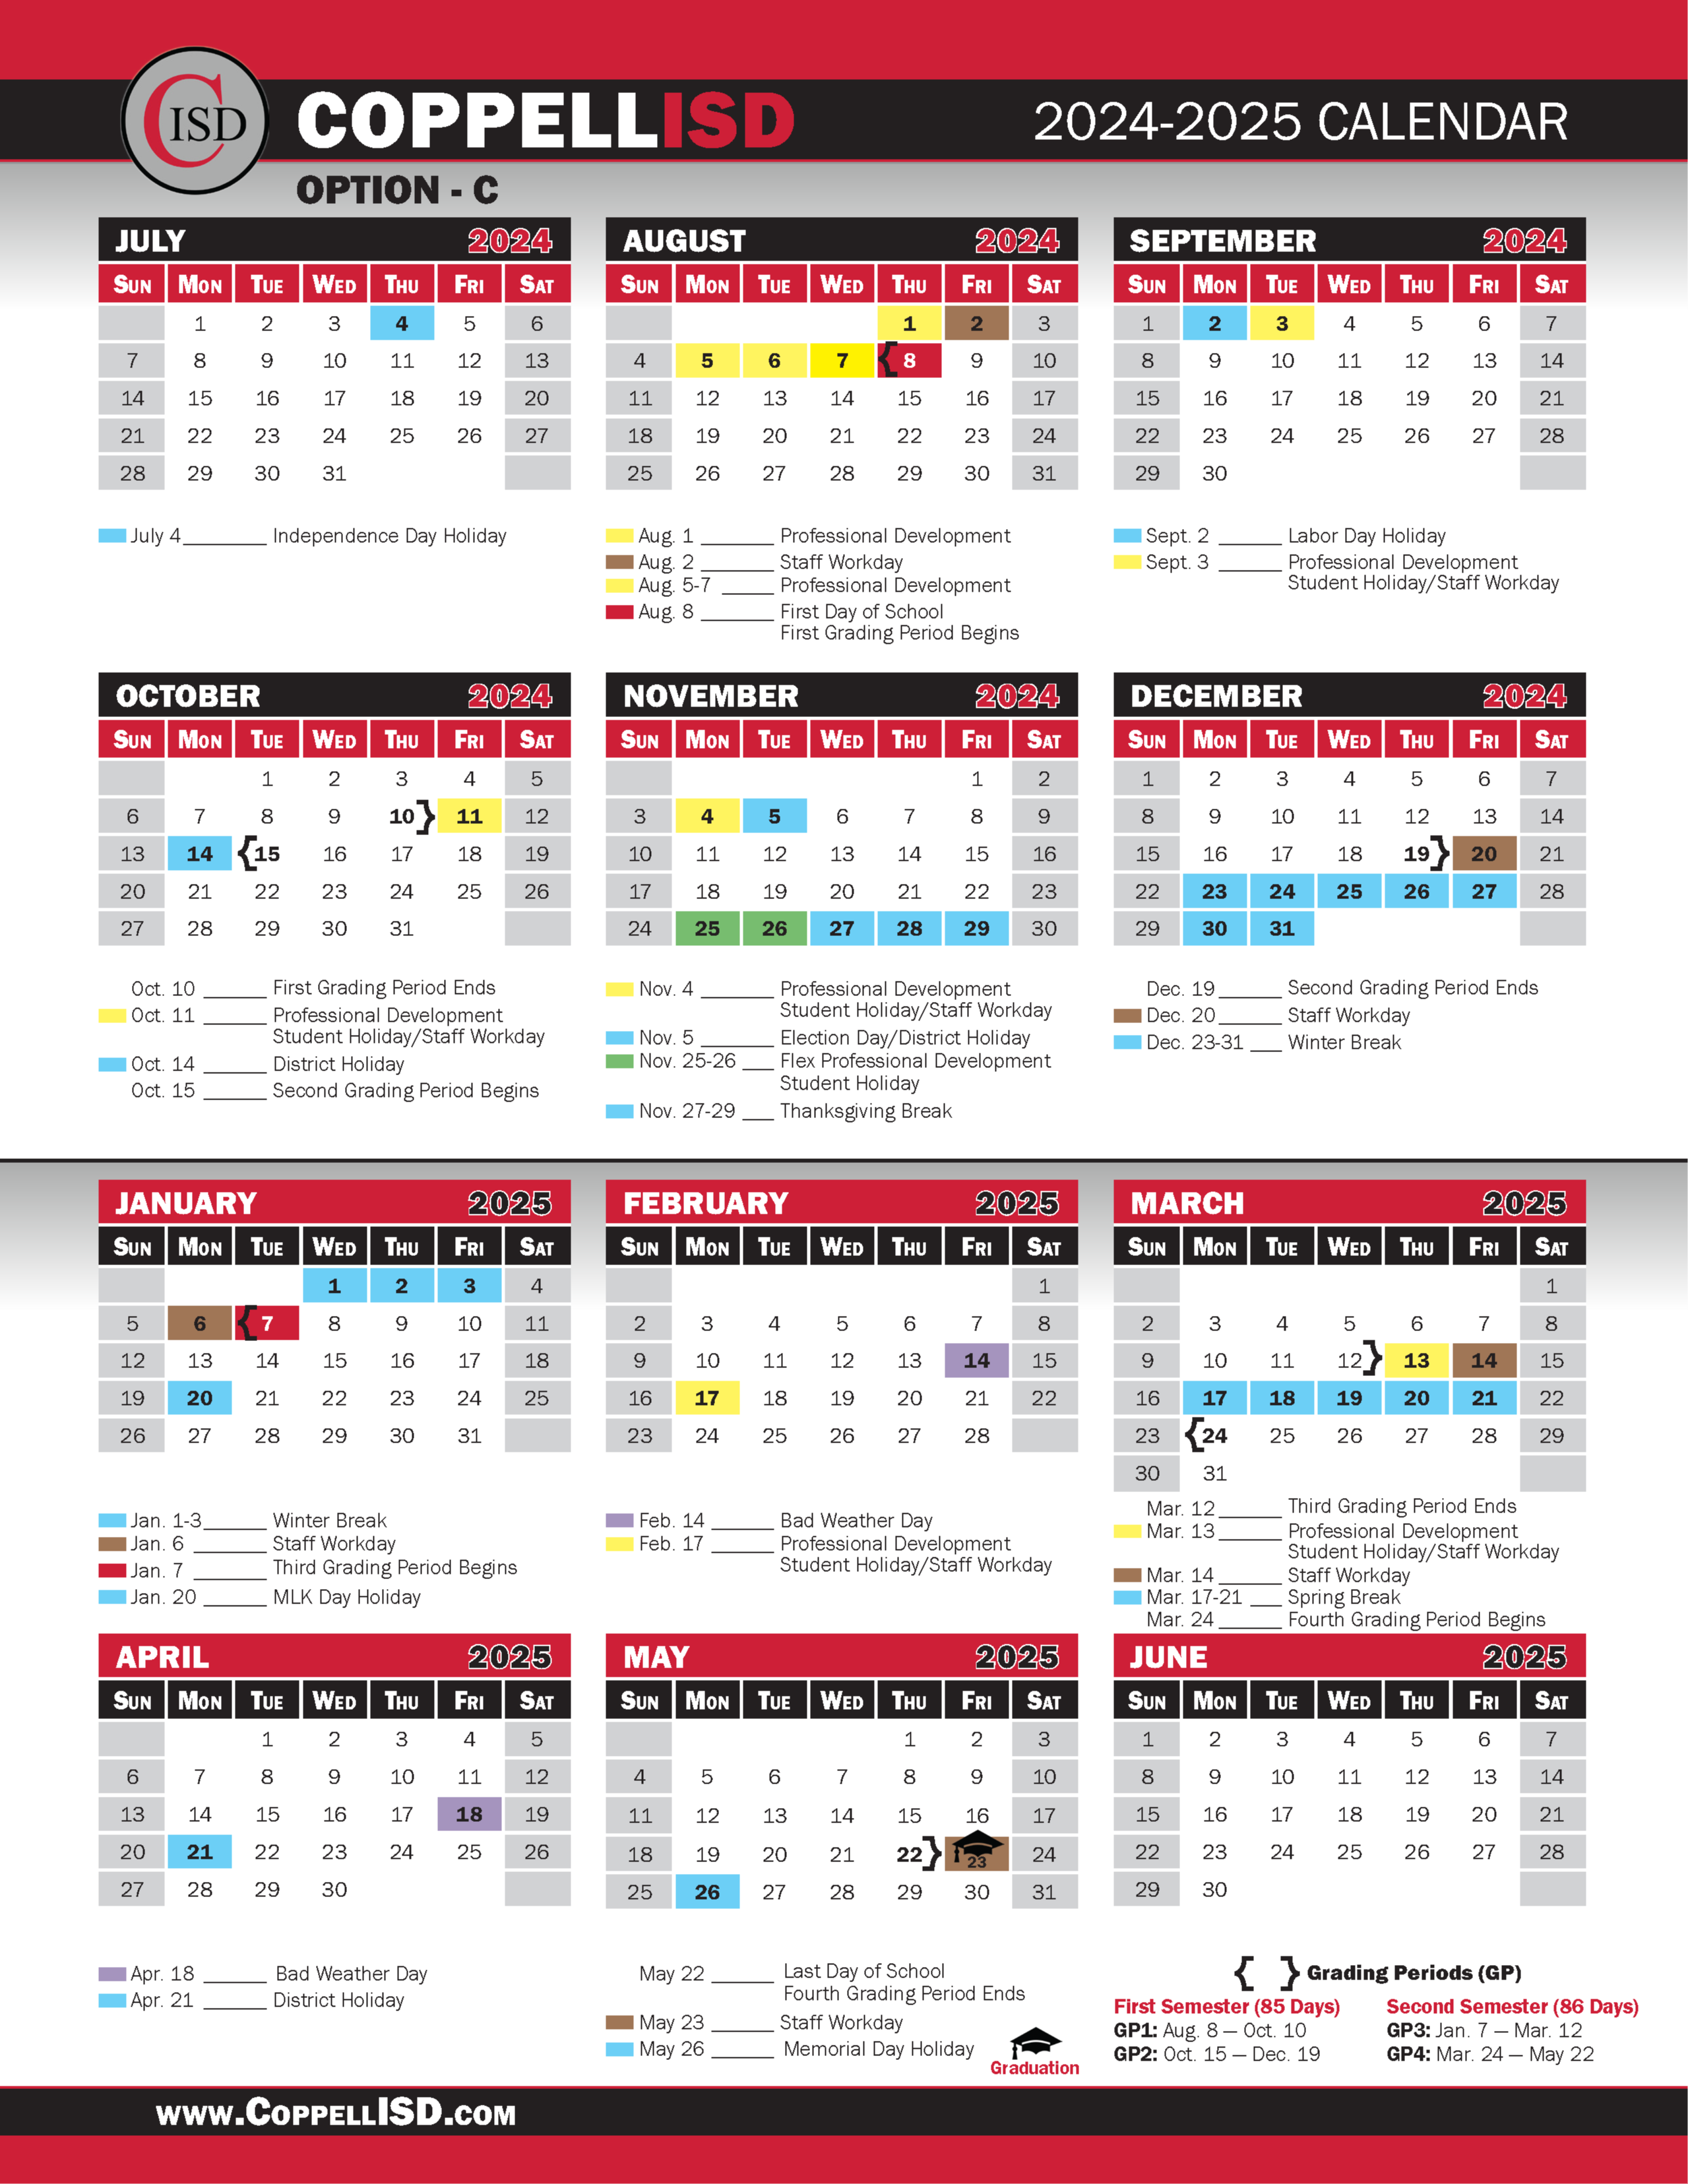 Calendar Options Coppell ISD